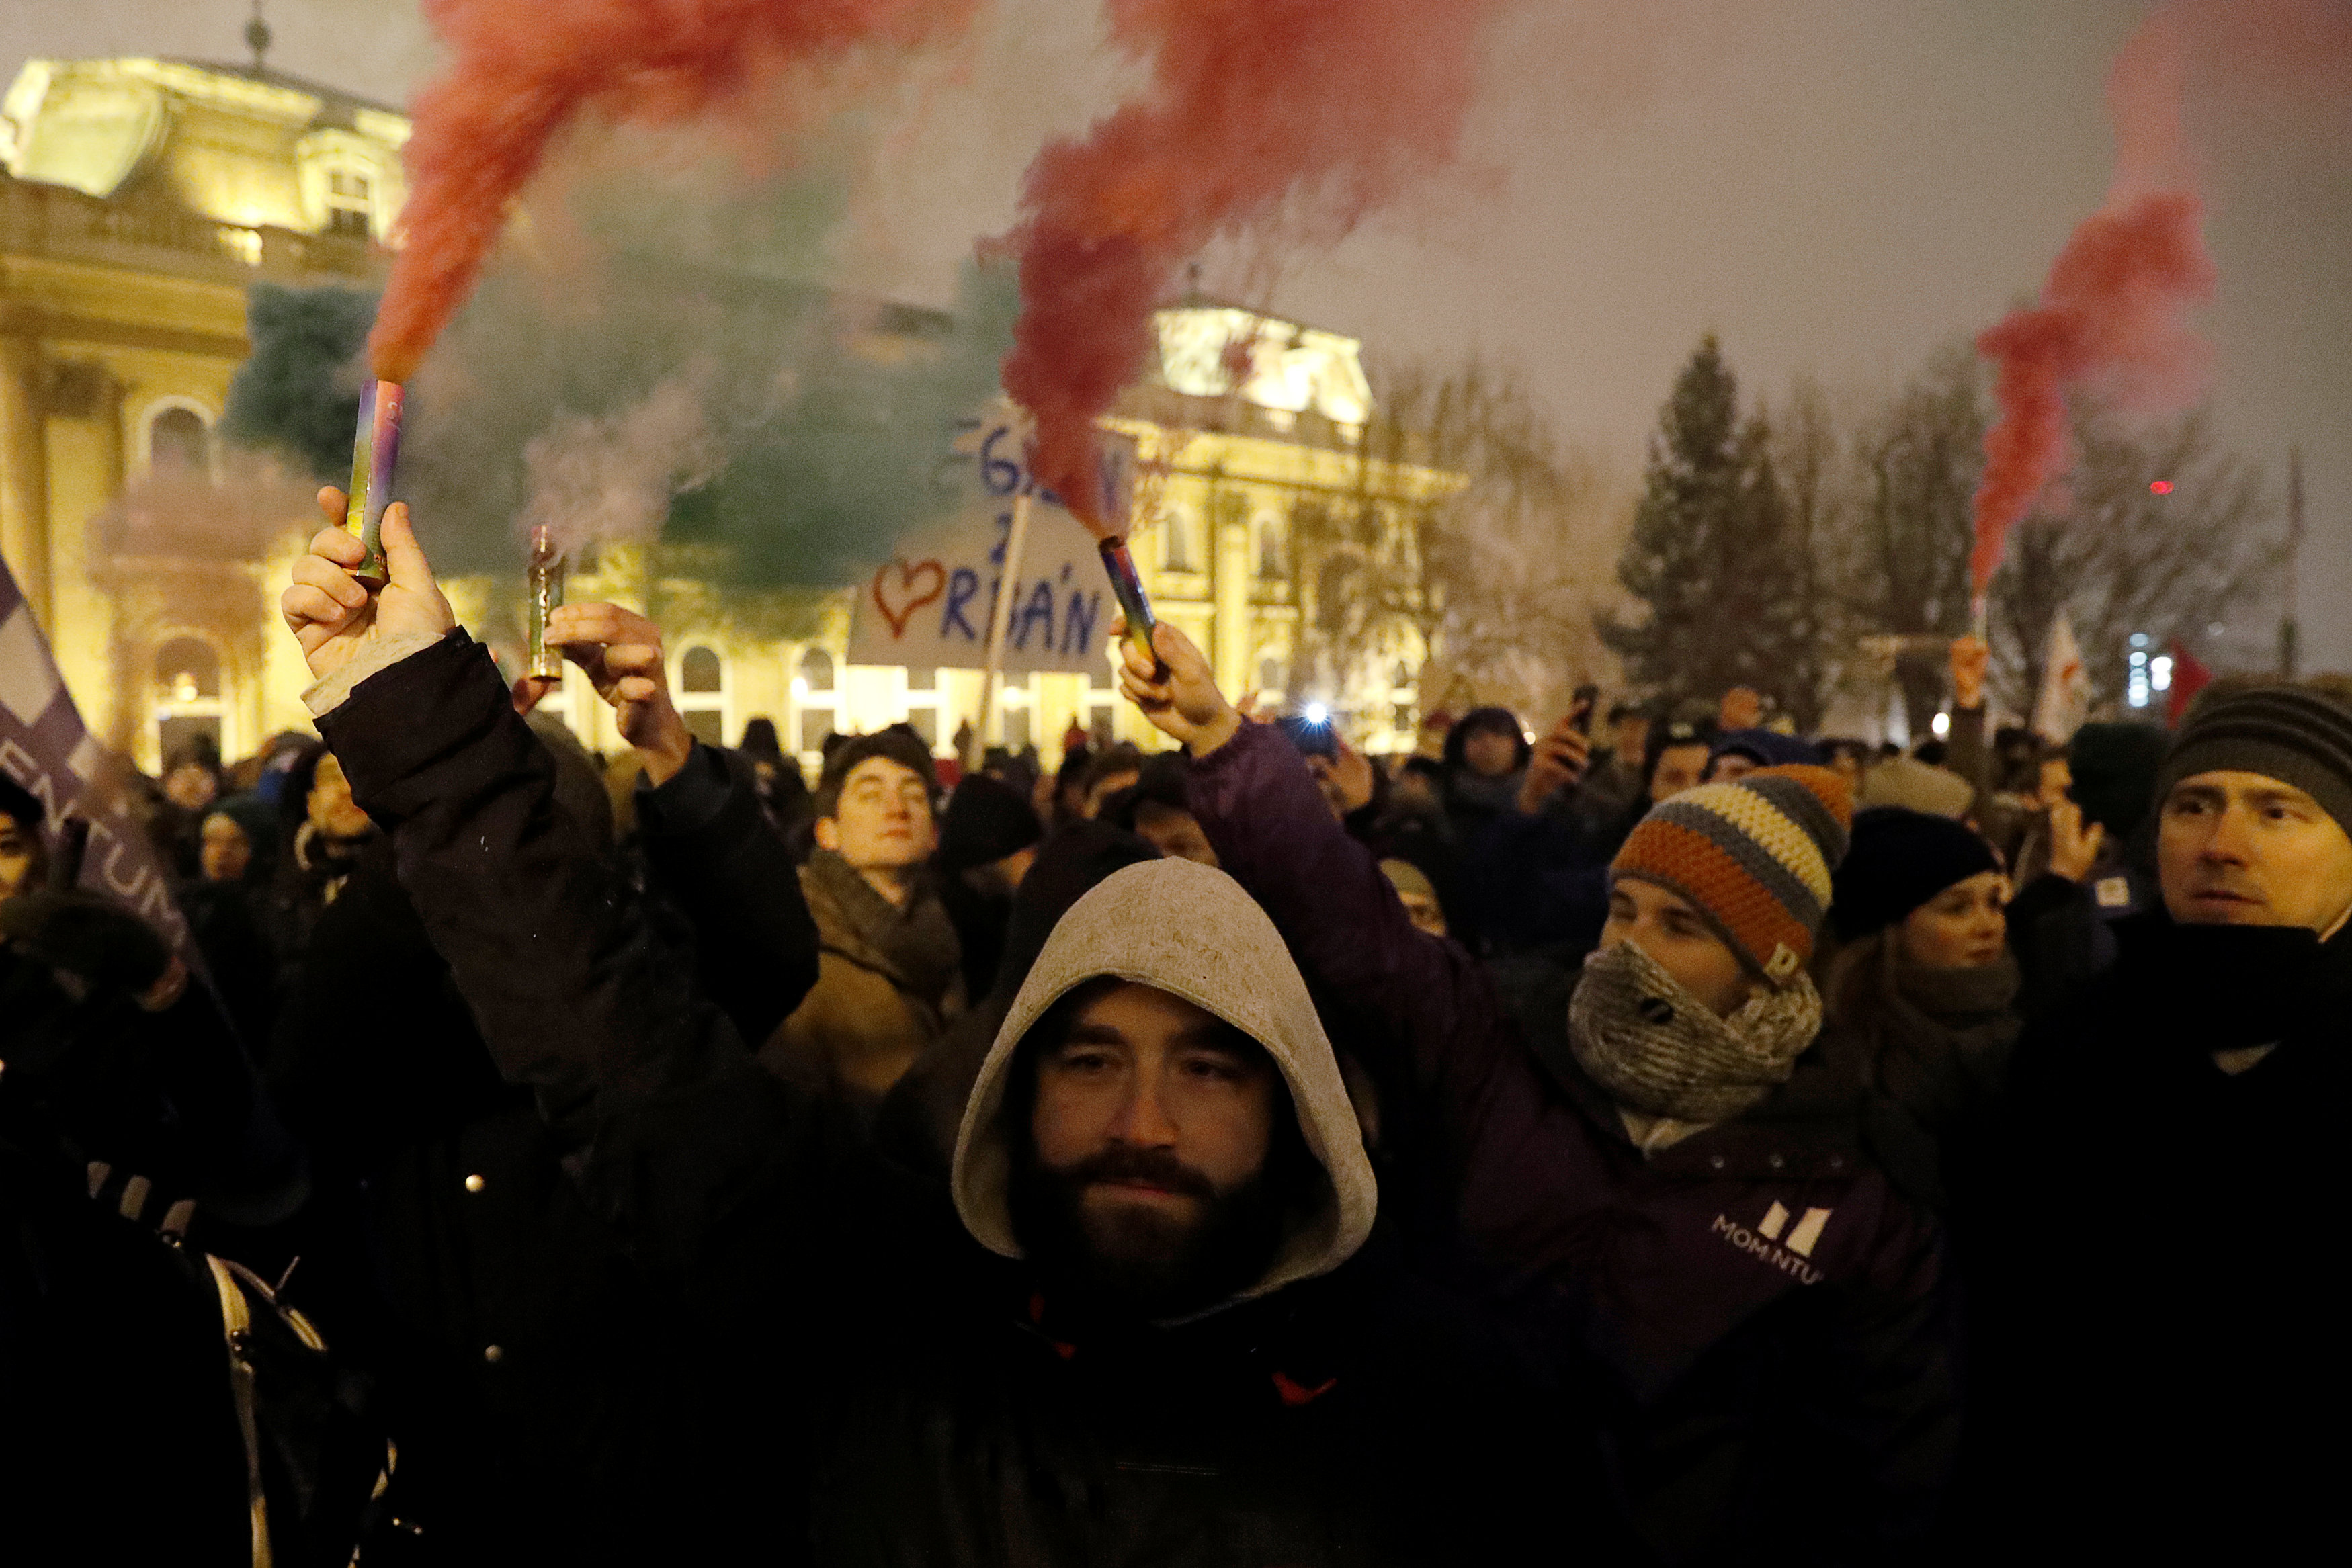 2018-12-21T224208Z_1273433001_RC11F96C7C00_RTRMADP_3_HUNGARY-PROTEST